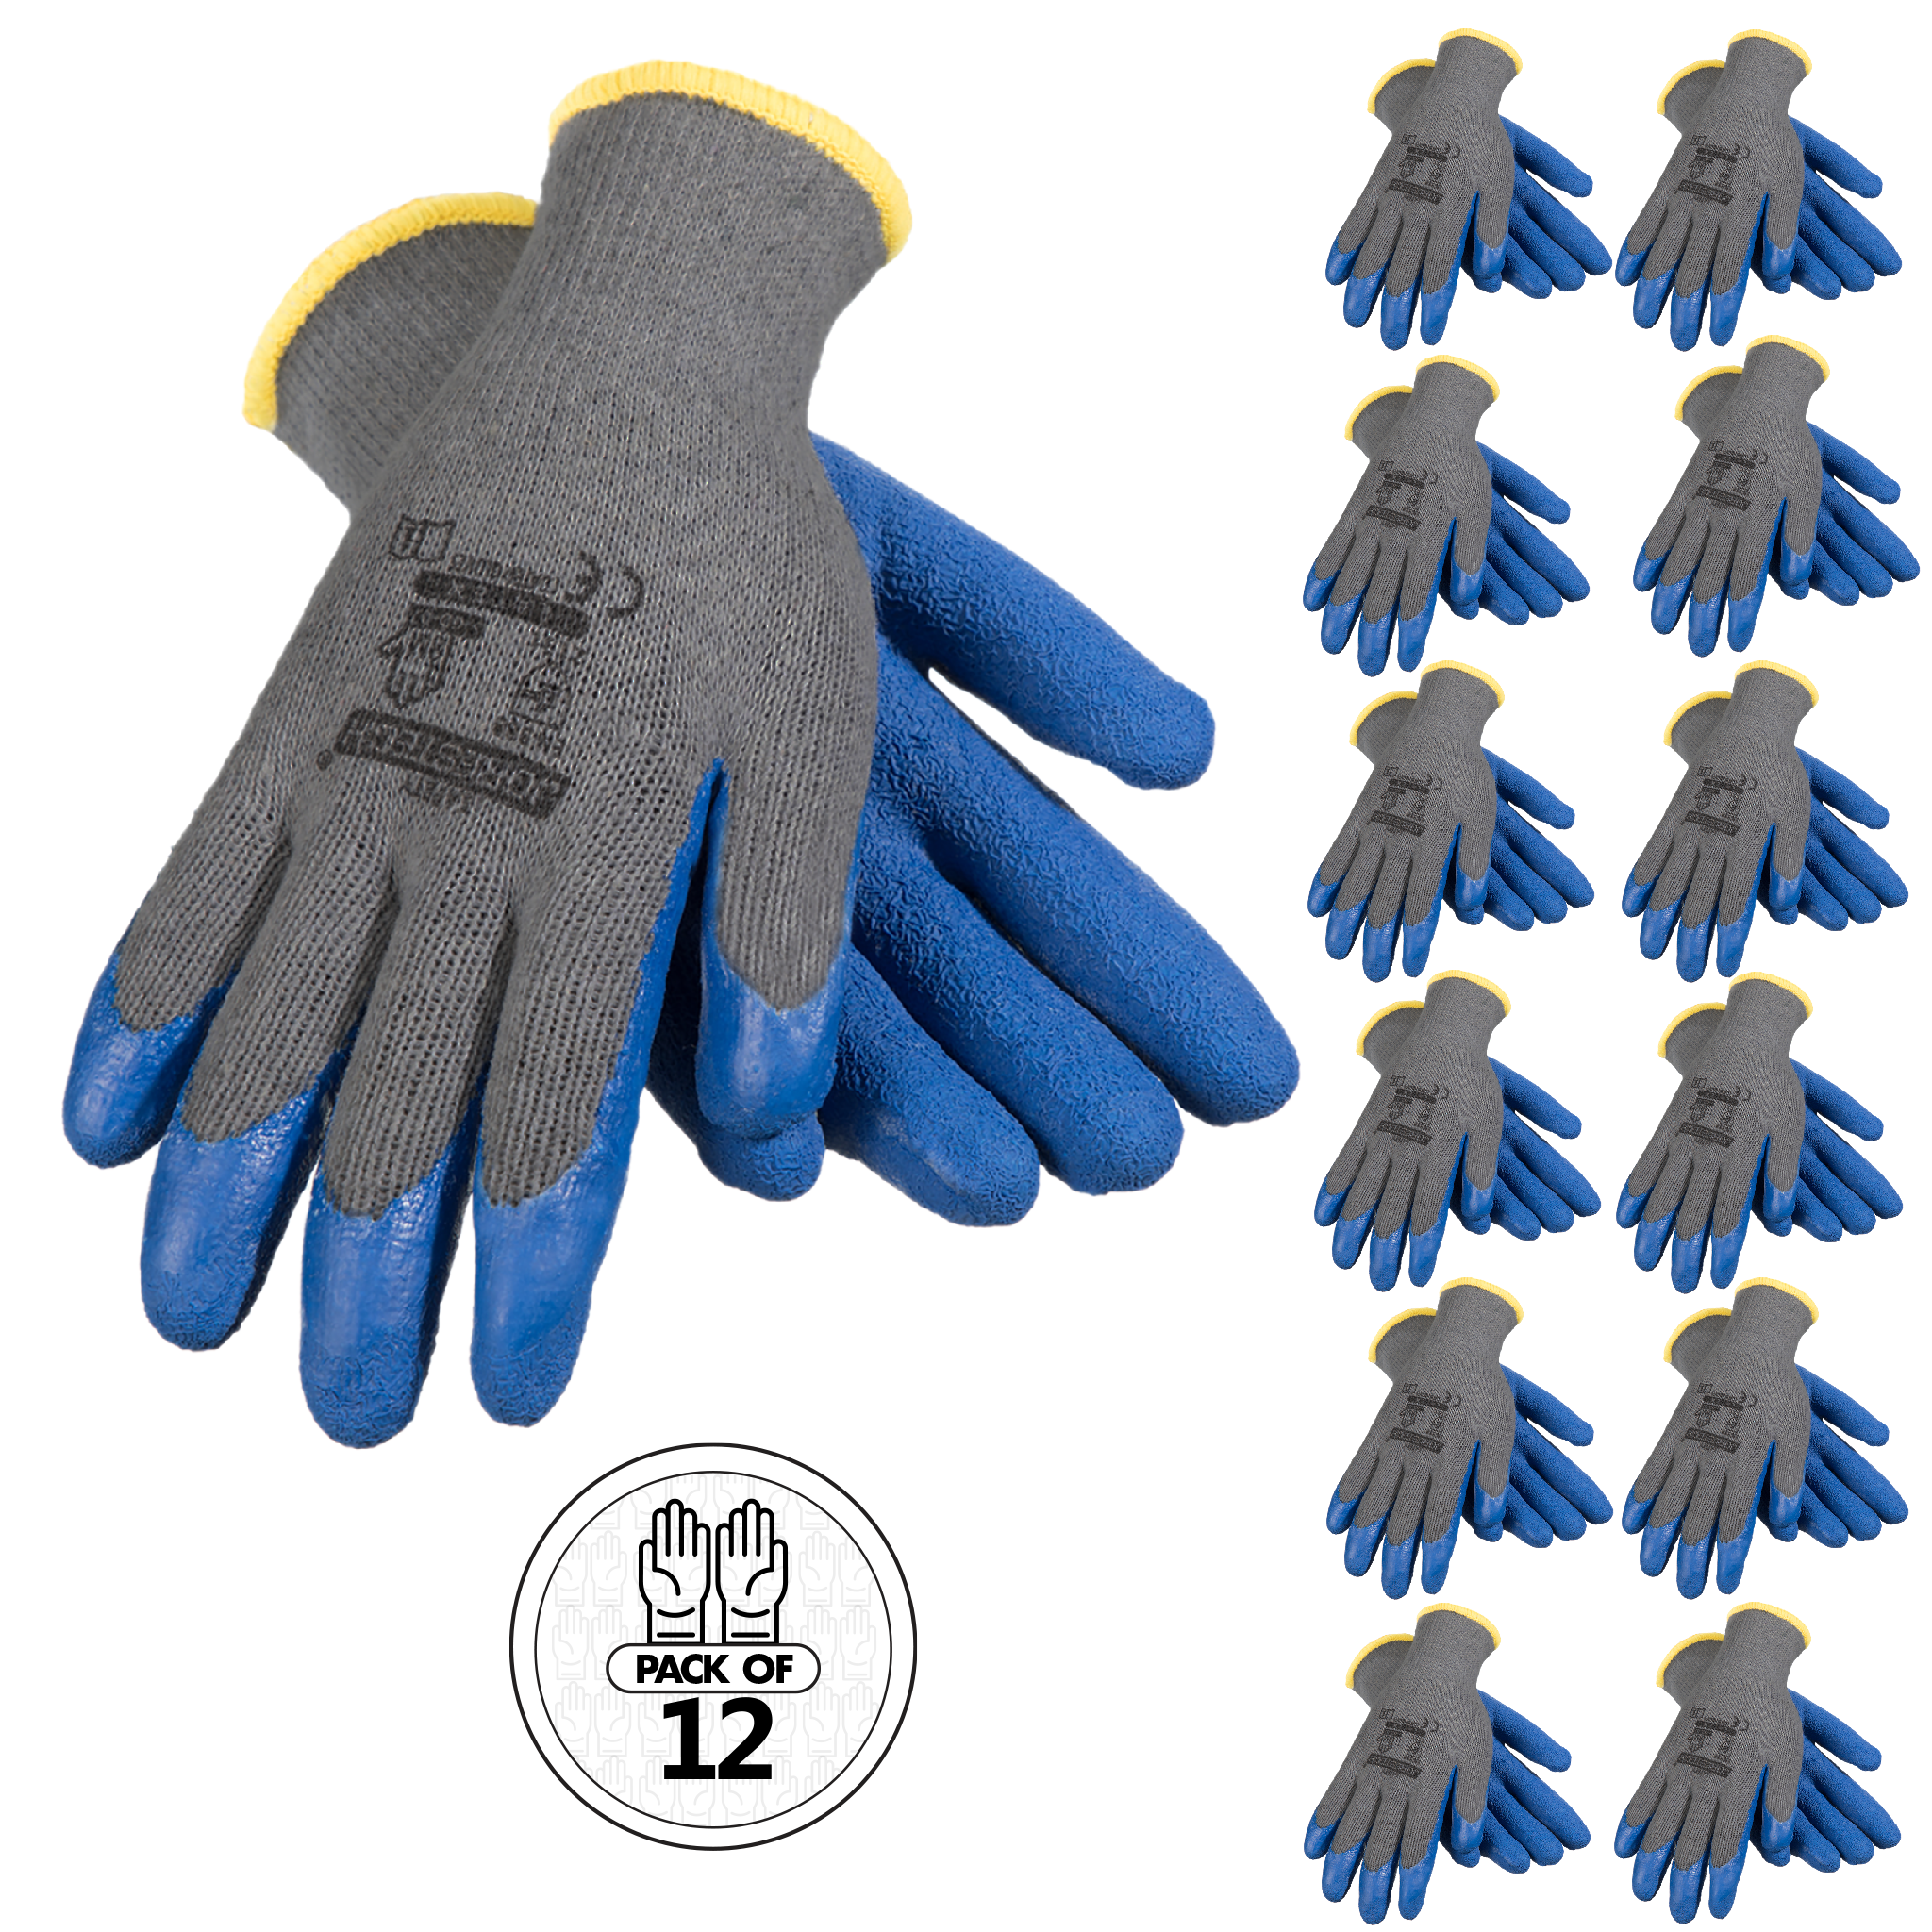 https://cdn.shopify.com/s/files/1/0517/5692/5094/files/SAFETY-WORK-GLOVES-WITH-CRINKLE-LATEX-DIPPED-PALMS-PACK-OF-12-S-GD-07-JORESTECH-H_11_10494f63-117d-4186-b207-7753af4dab4a.png?v=1689087308